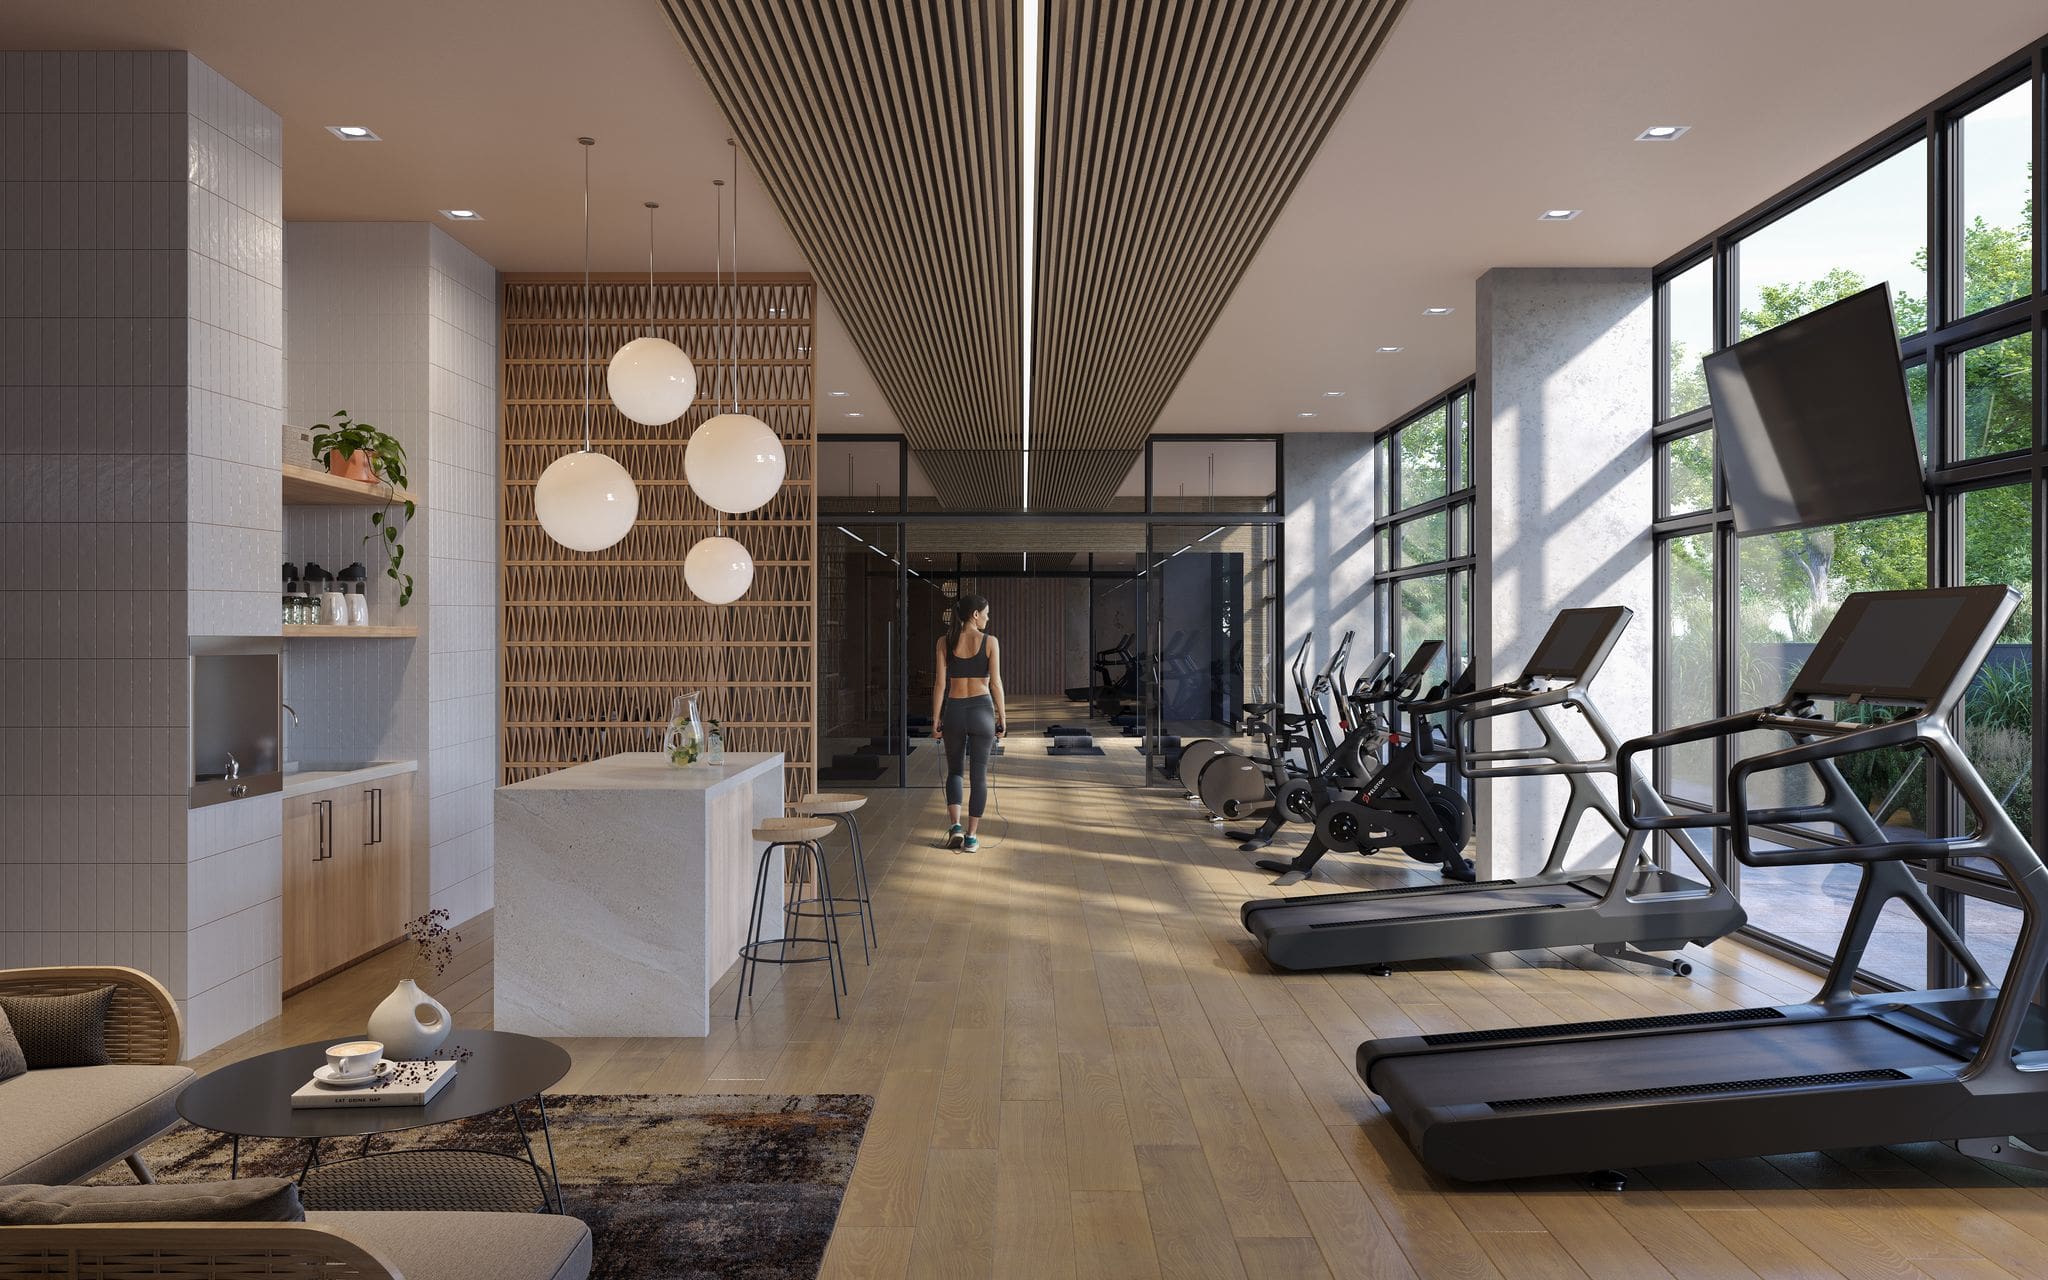 Lakeview_DXE_Club_Wellness_Centre-min